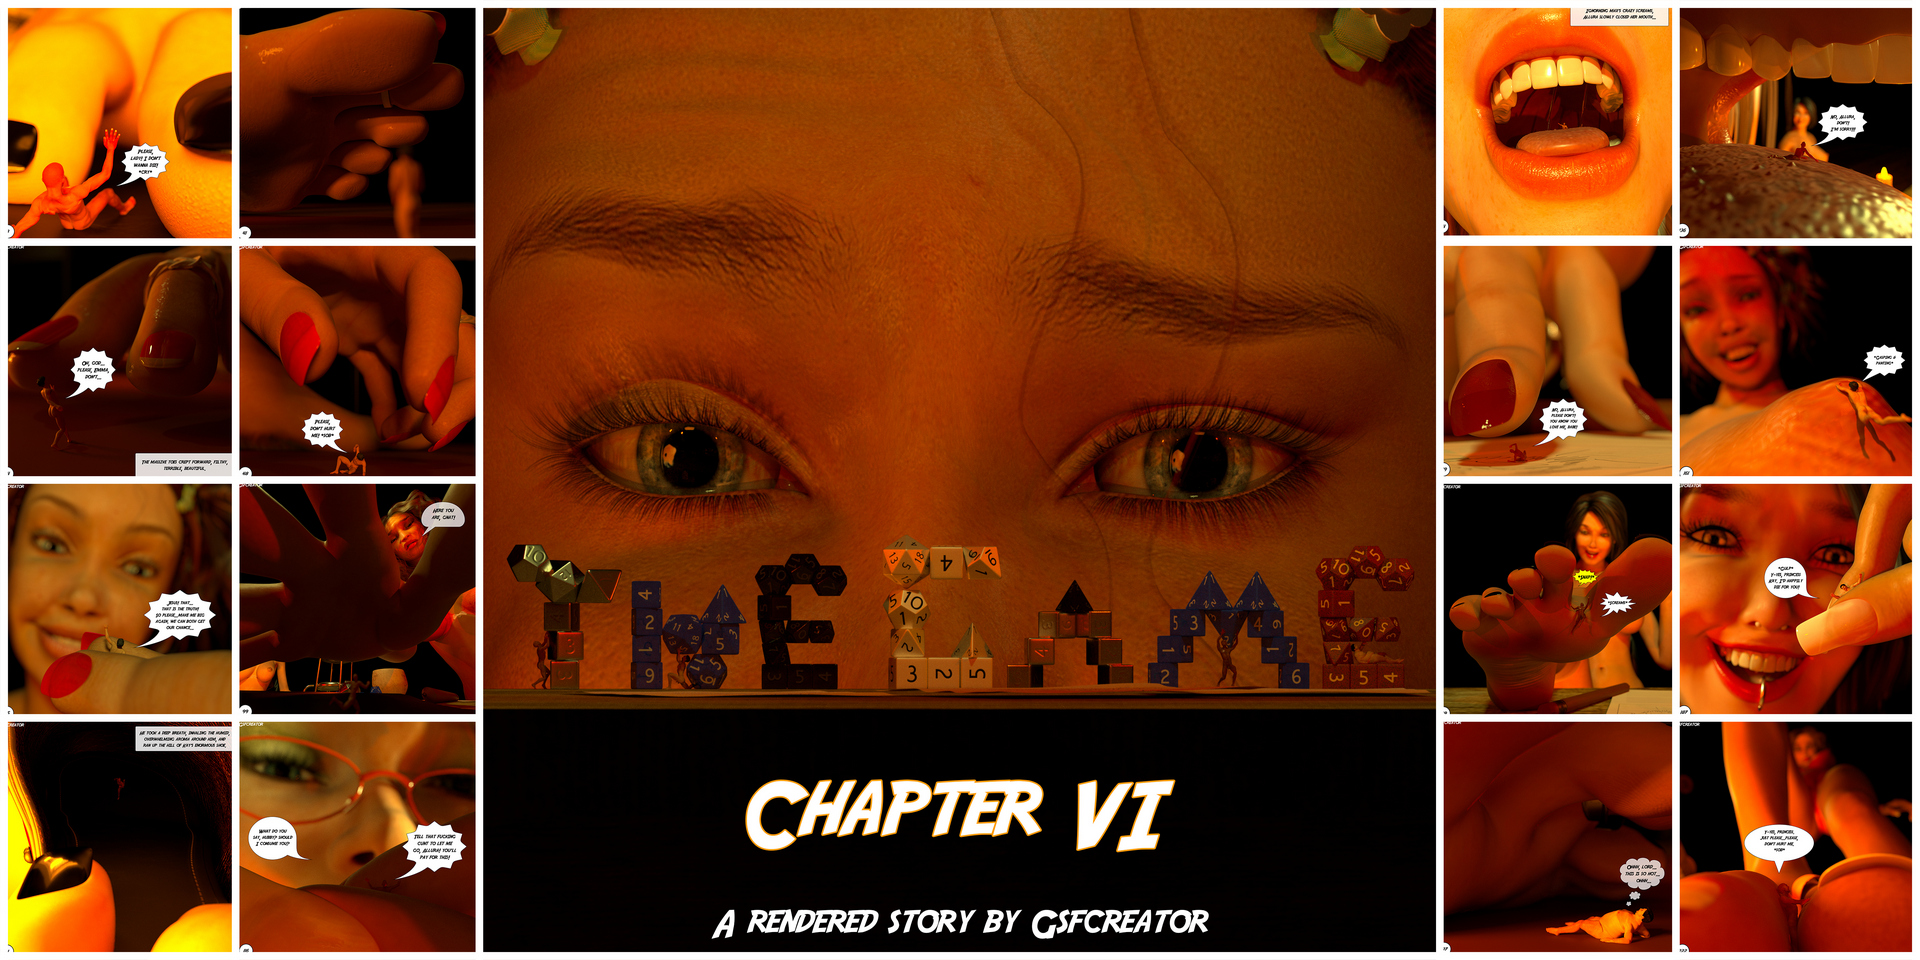 The game chapter 6